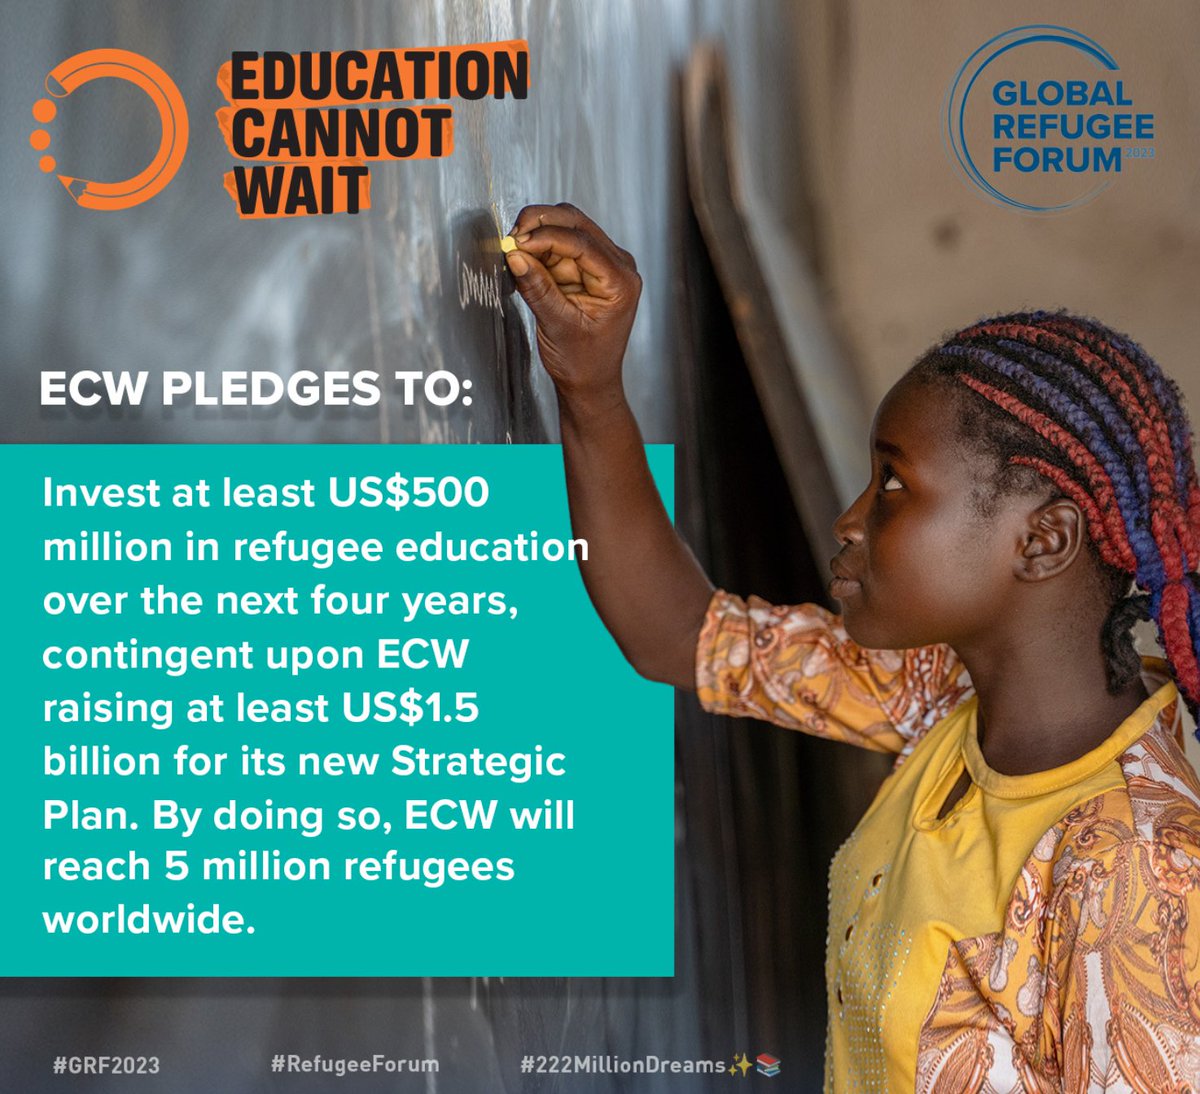 #ECW pledges to invest $500M in #refugee education at #GRF2023 upon raising $1.5 BN for our Strategic Plan!

Pledge supports the multi-stakeholder education pledge & thematic pledges on #ECD, #EiE, #GenderEquality, #MHPSS, #SecondaryEducation & #teachers.

educationcannotwait.org/resource-libra…